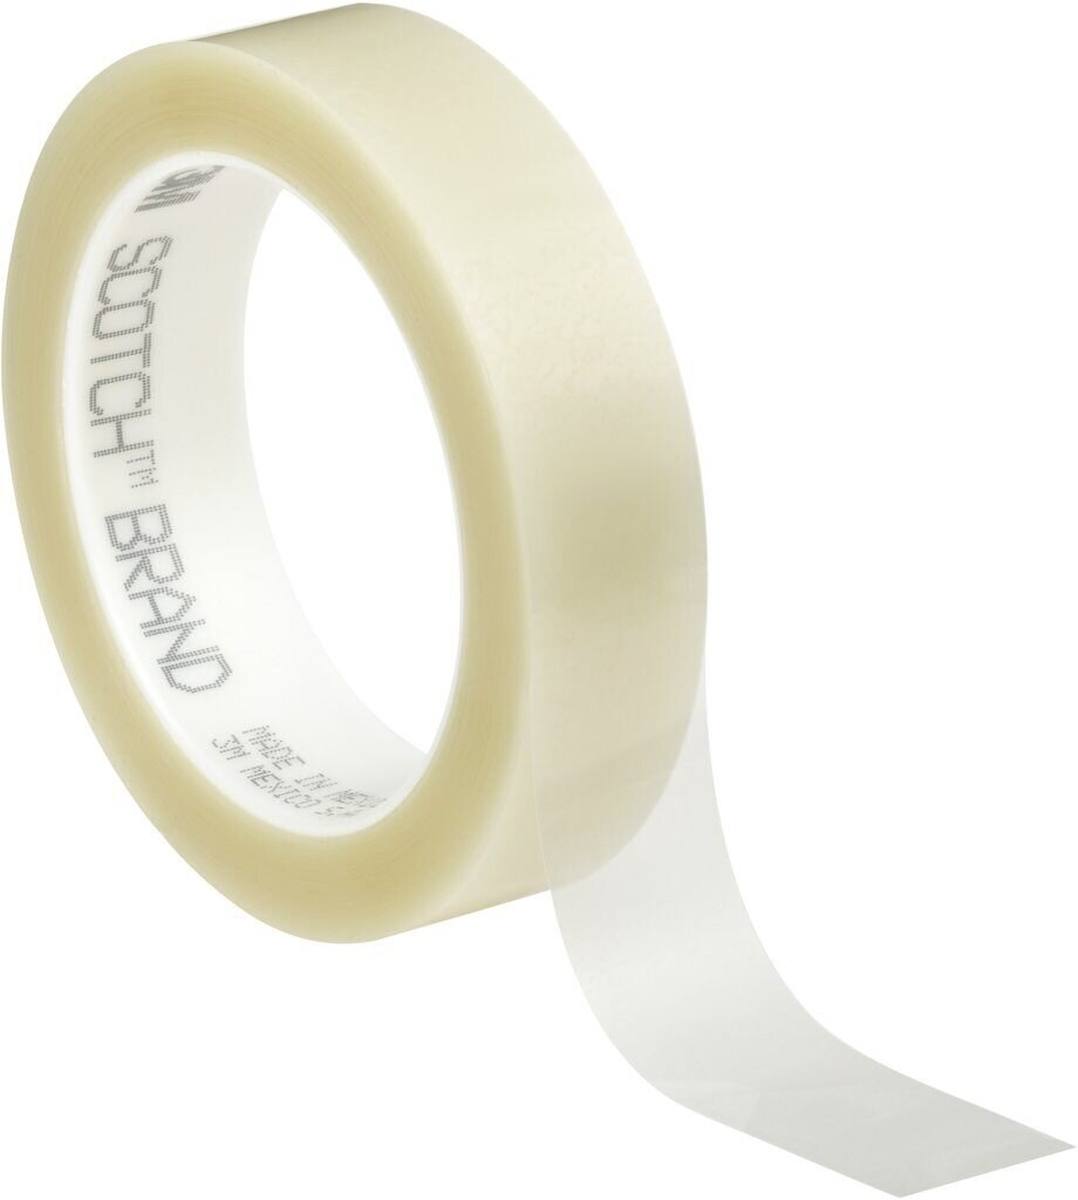 3M polyester adhesive tape 853, transparent, 76.2 mm x 66 m, 0.06 mm